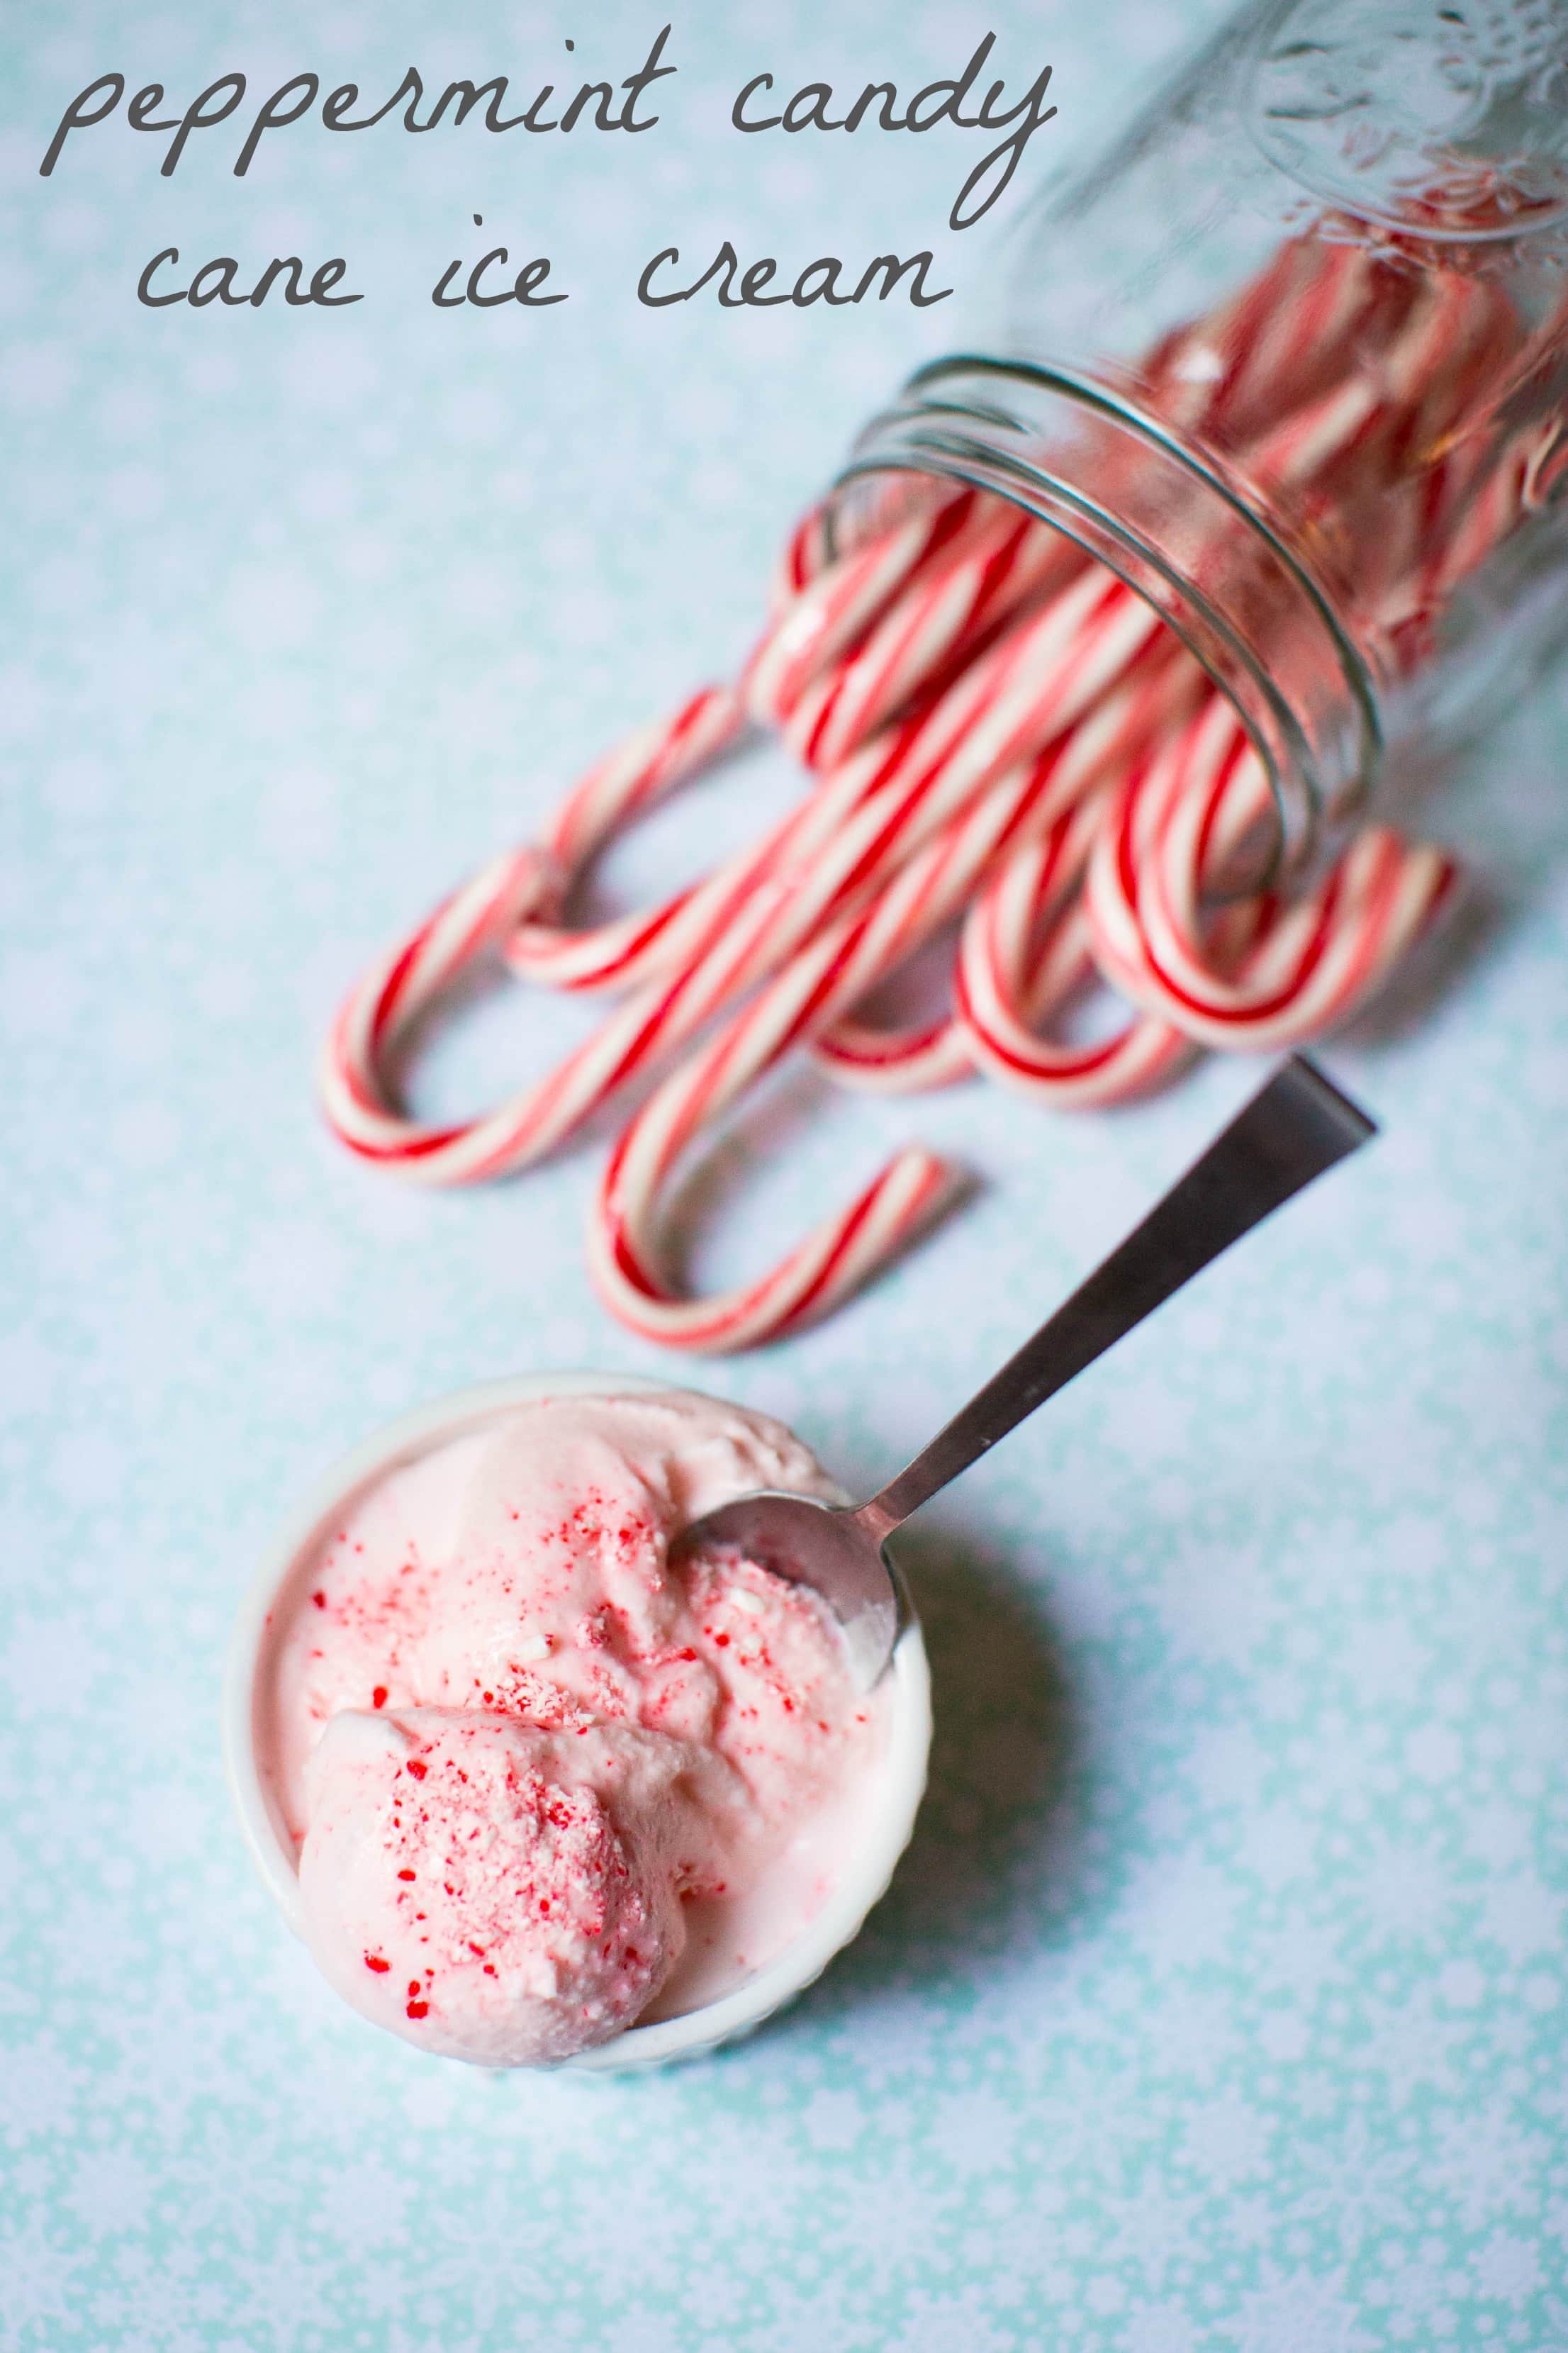 Guest Post: Peppermint Candy Cane Ice Cream